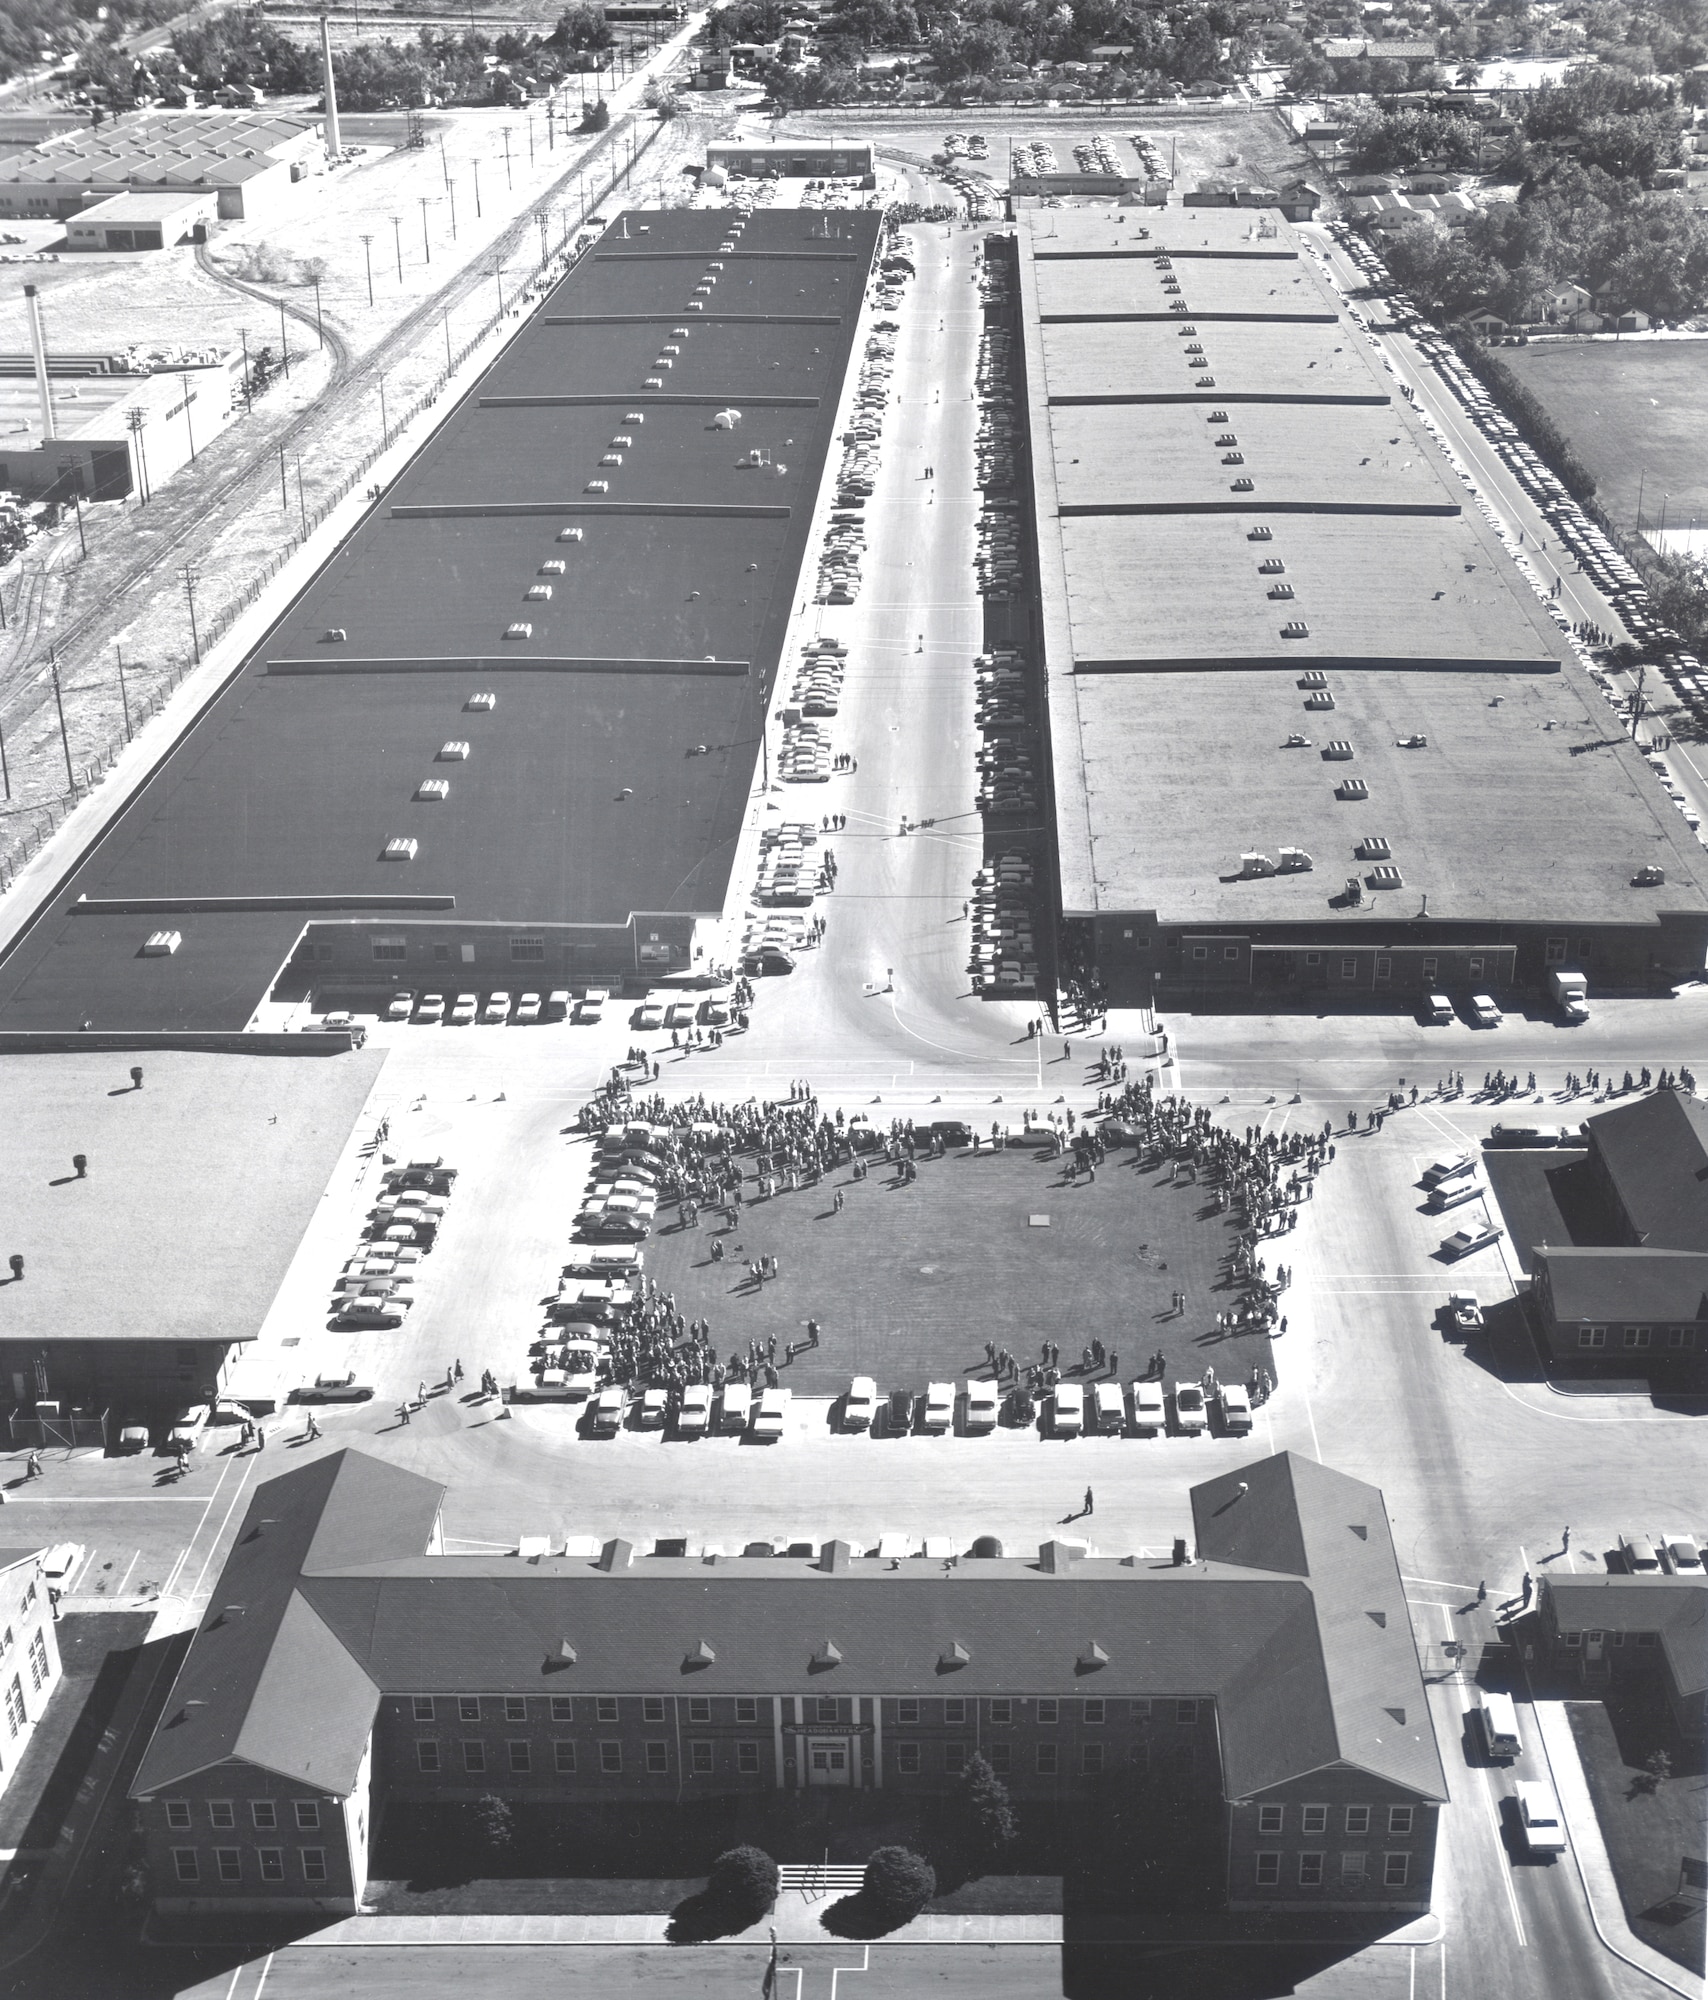 A 1950s aerial view of the Air Reserve Records Center on York Street, Denver, Colo. ARRC officially opened its doors March 1, 1954, almost 60 years ago. It wasn't until Sept.1, 1965, that it was renamed to the Air Reserve Personnel Center due to increasing involvement in all areas of personnel management and not only records. ARPC will celebrate their 60th birthday on Feb. 28, 2014.